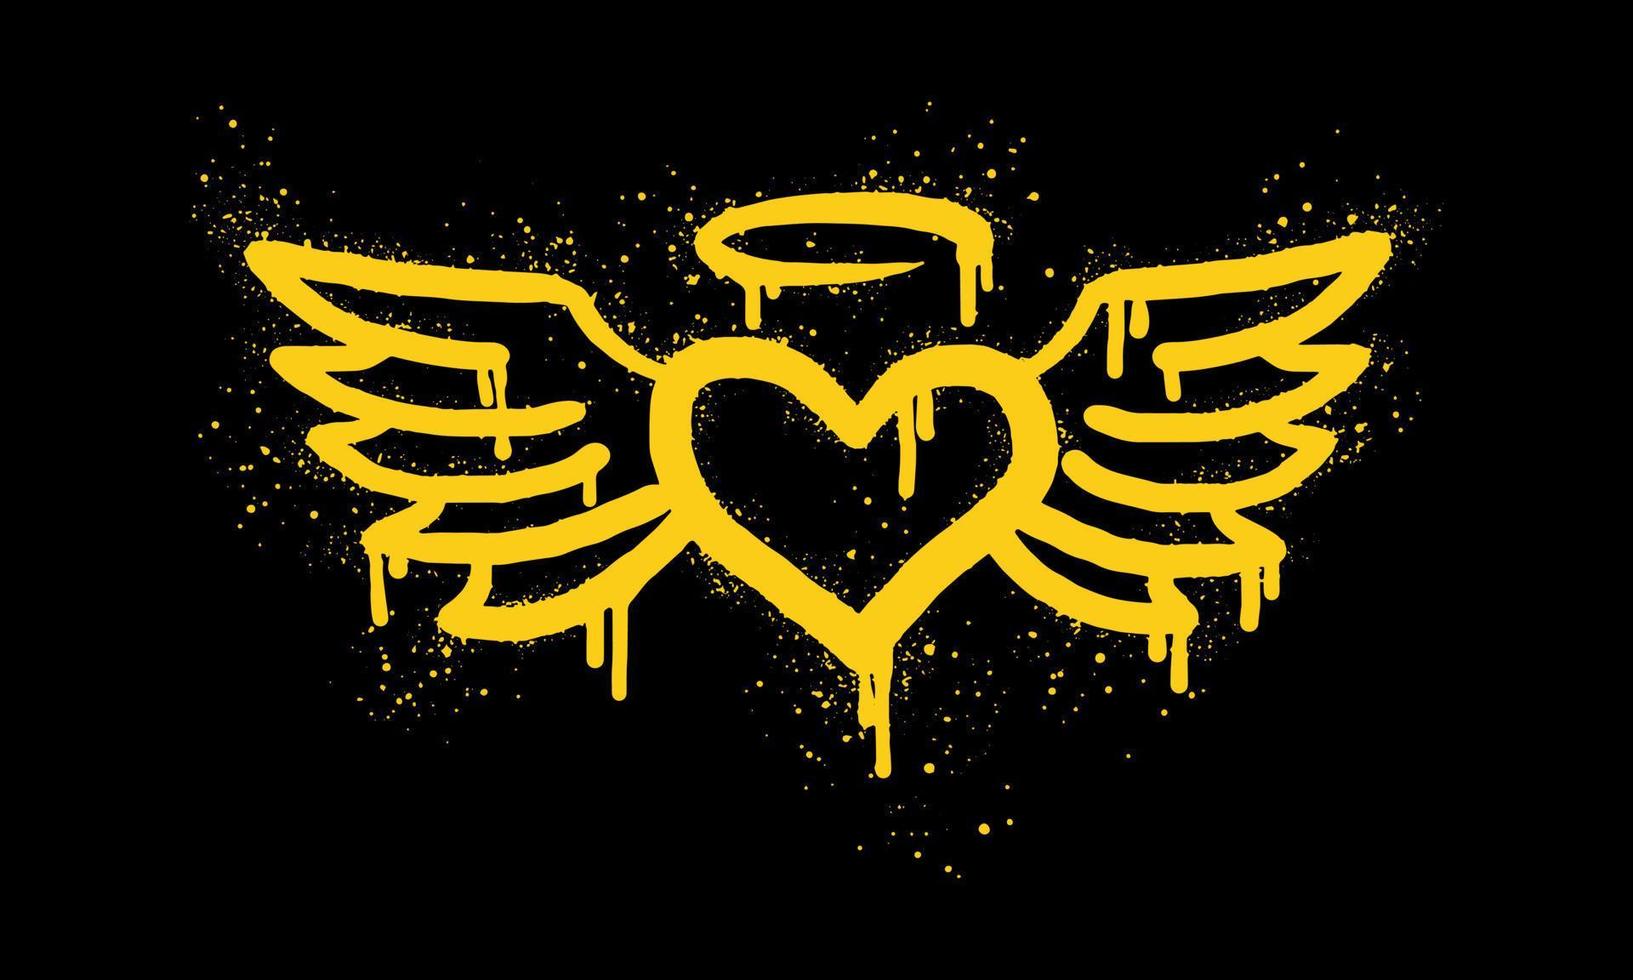 Spray painted graffiti flying heart icon in gold color. Heart with wings drip symbol. isolated on black background. vector illustration